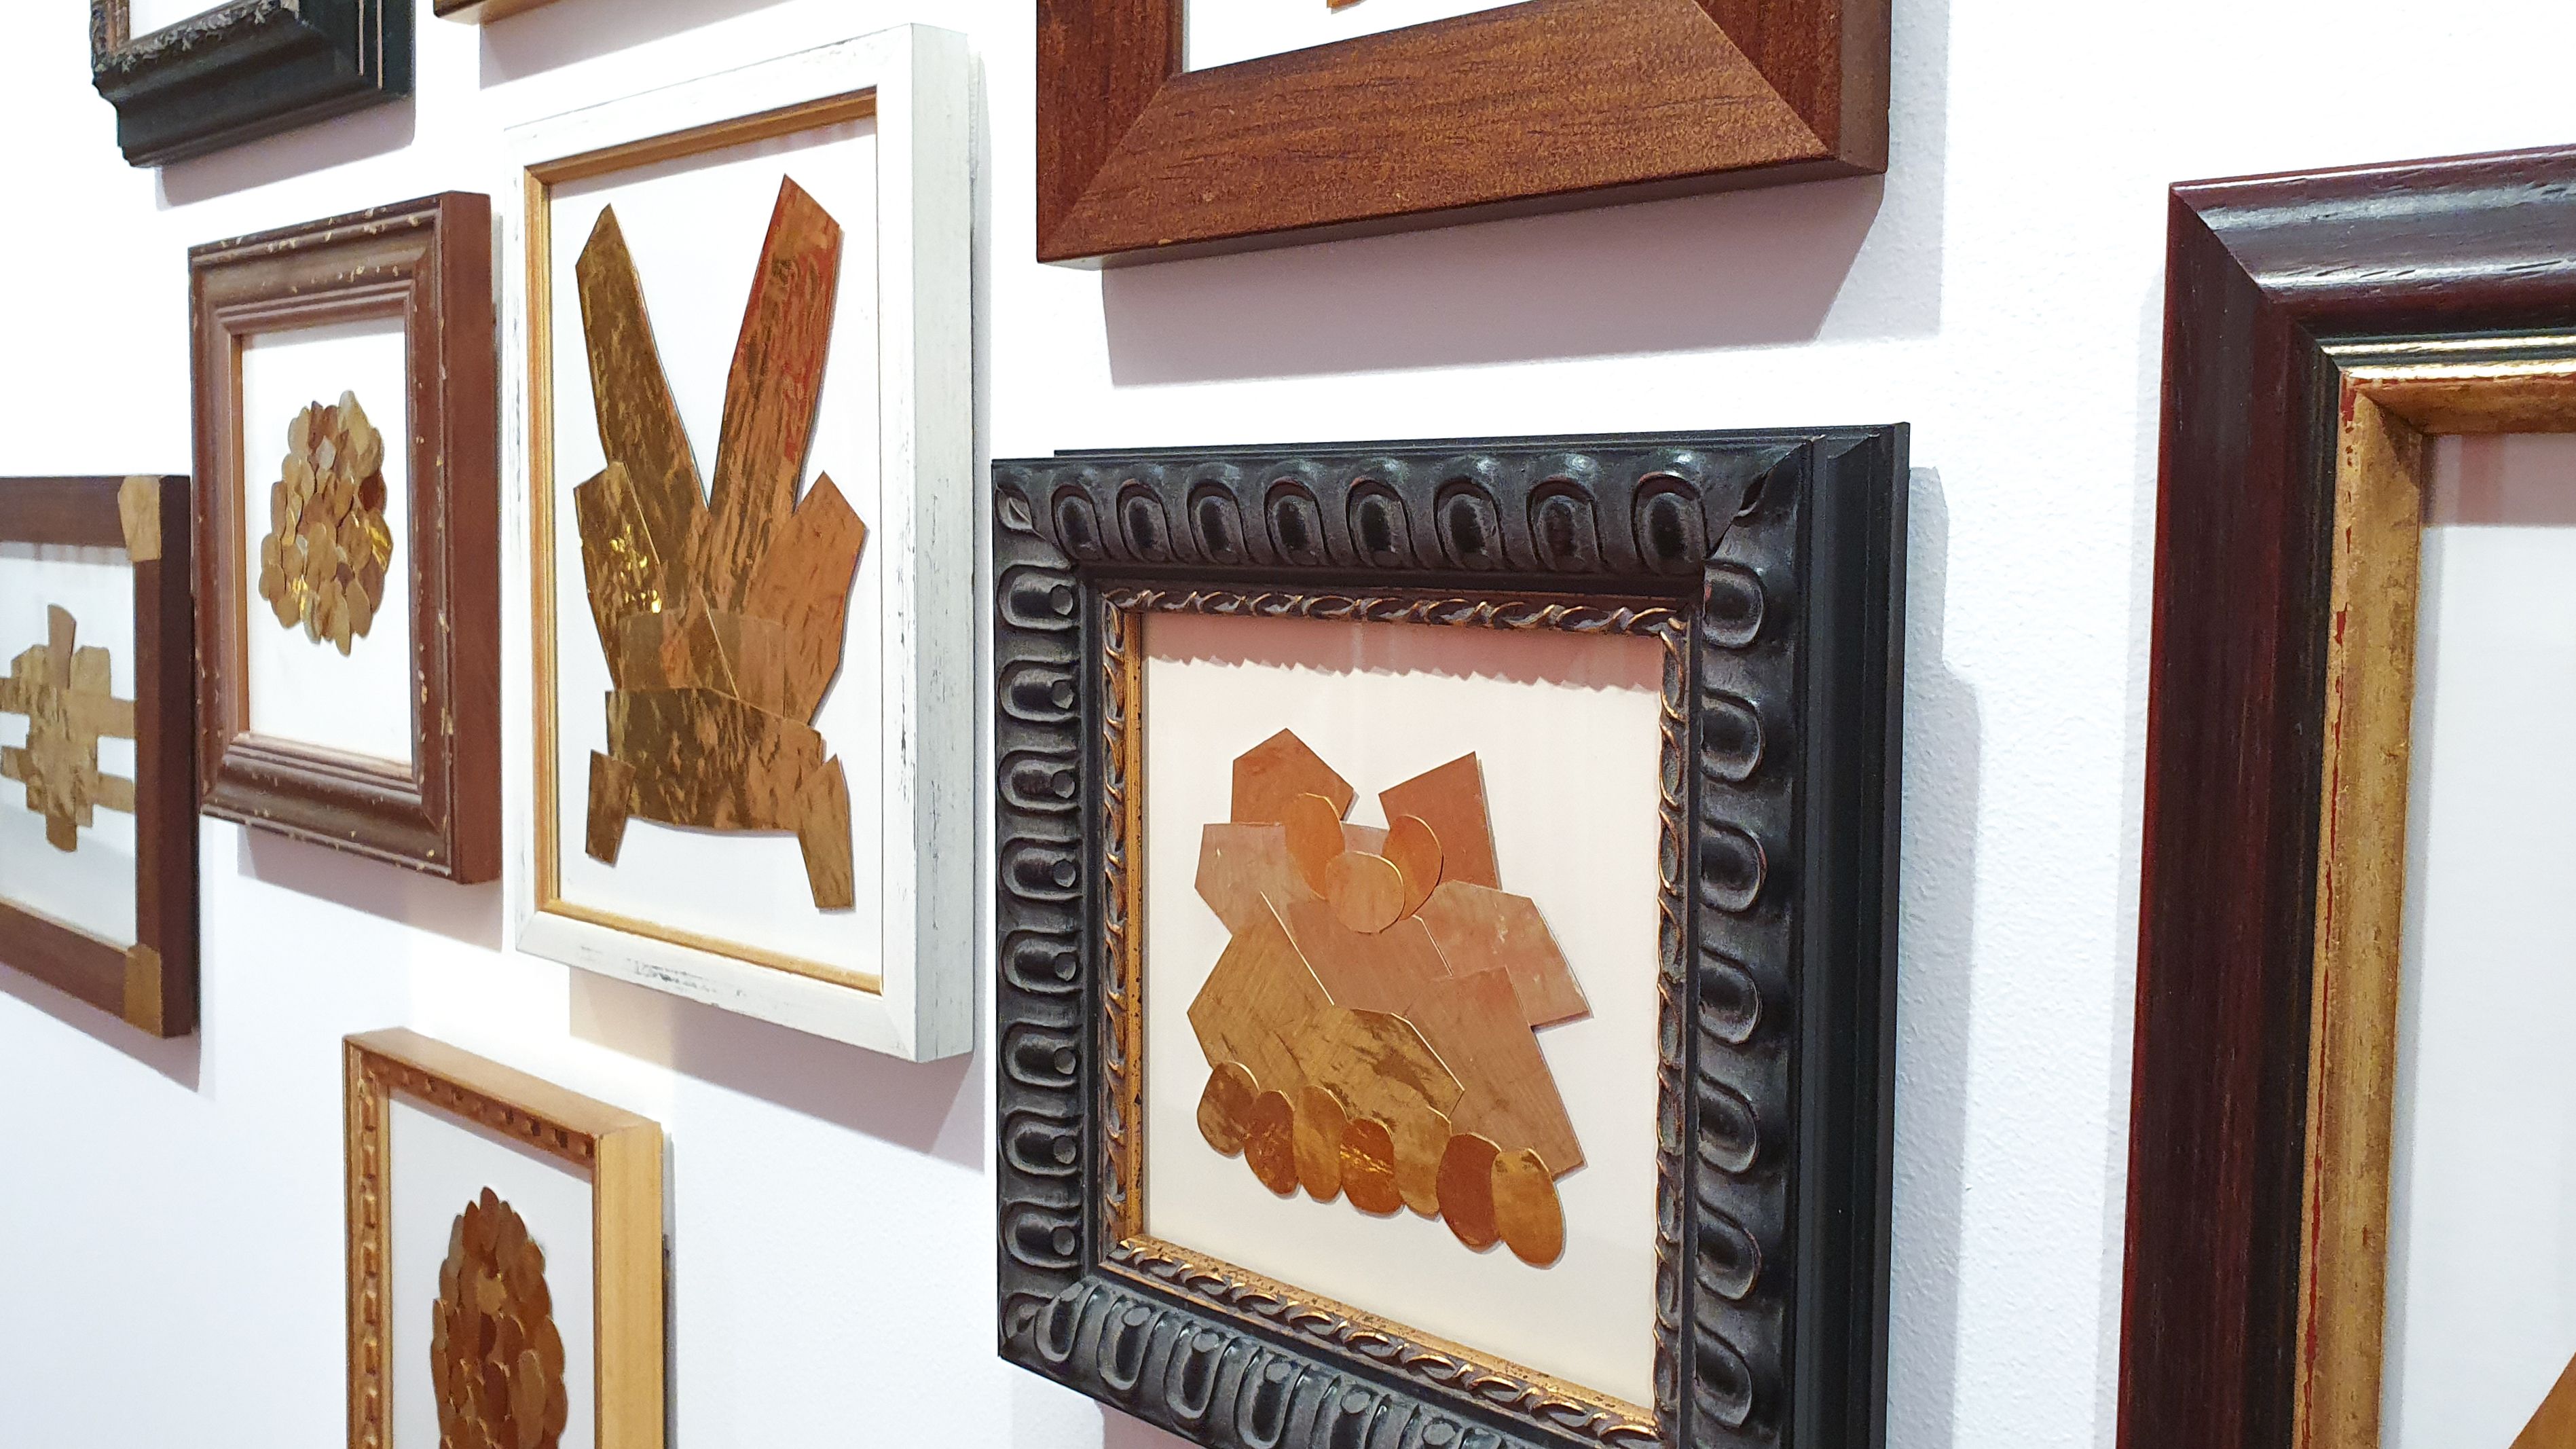 Geometric shapes made from pieces of gold-coloured metal are displayed in an eclectic assortment of wooden frames and hung on a white wall in the Boroondara Town Hall Gallery